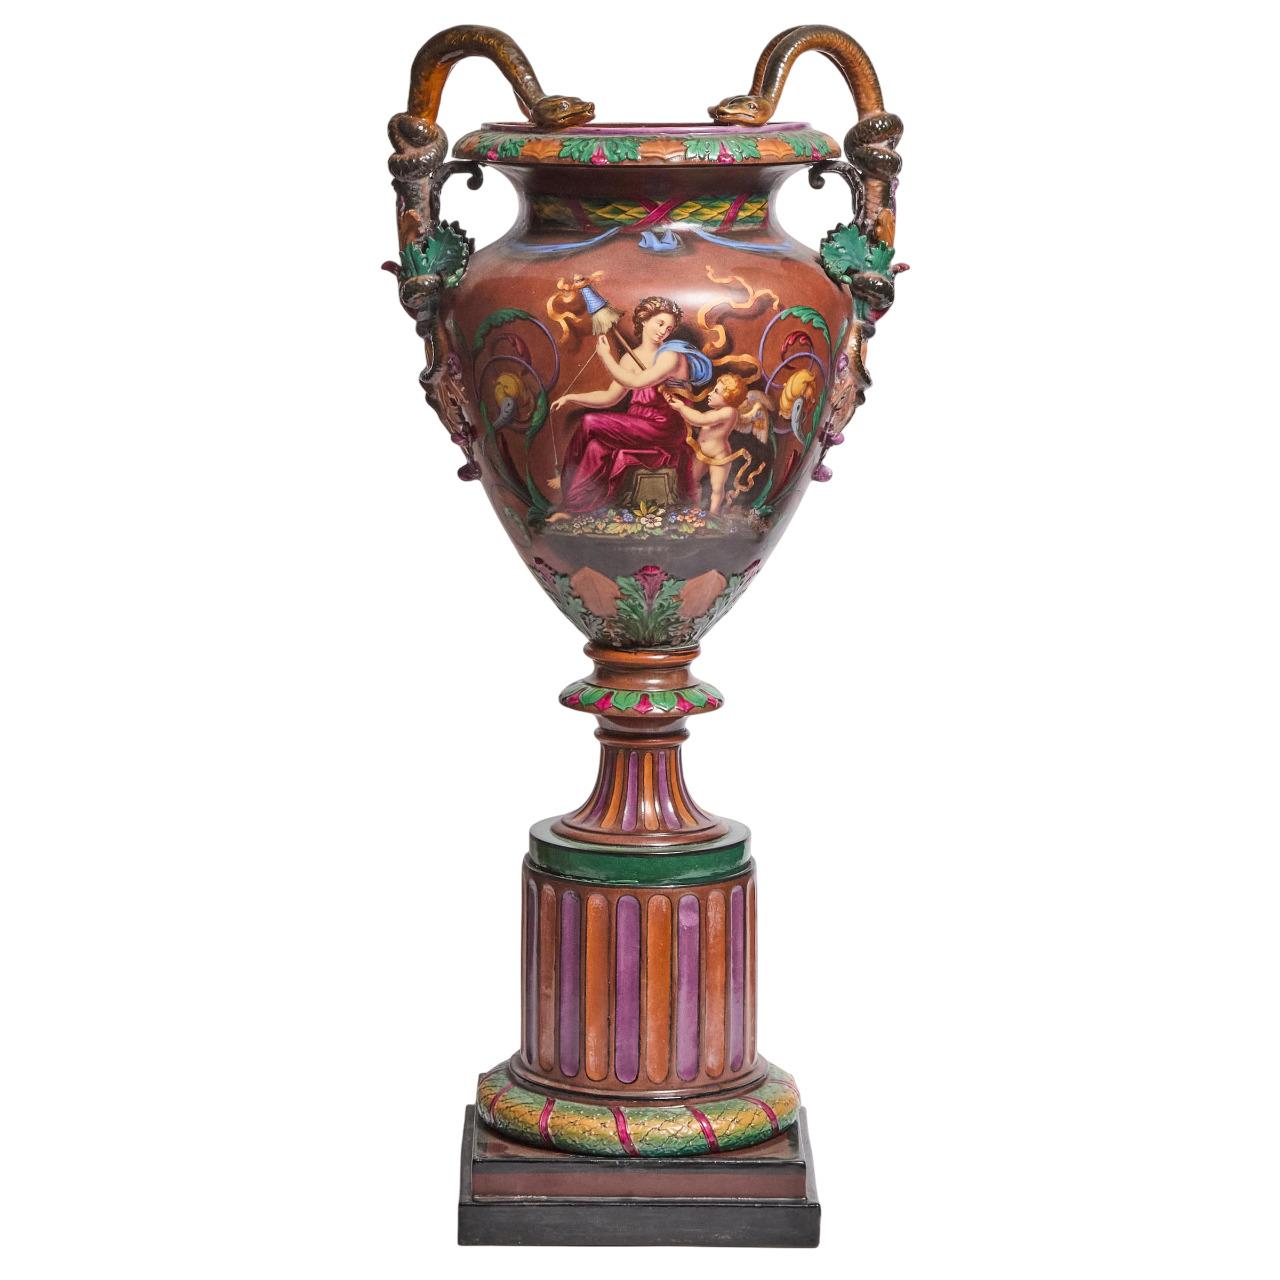 This antique majolica Exhibition vase or urn was undoubtedly made by the Royal Worcester factory in the Baroque Revival style, around 1864. The piece is stamped with the Royal Worcester crown mark thrice at the base, and it is consistent with the